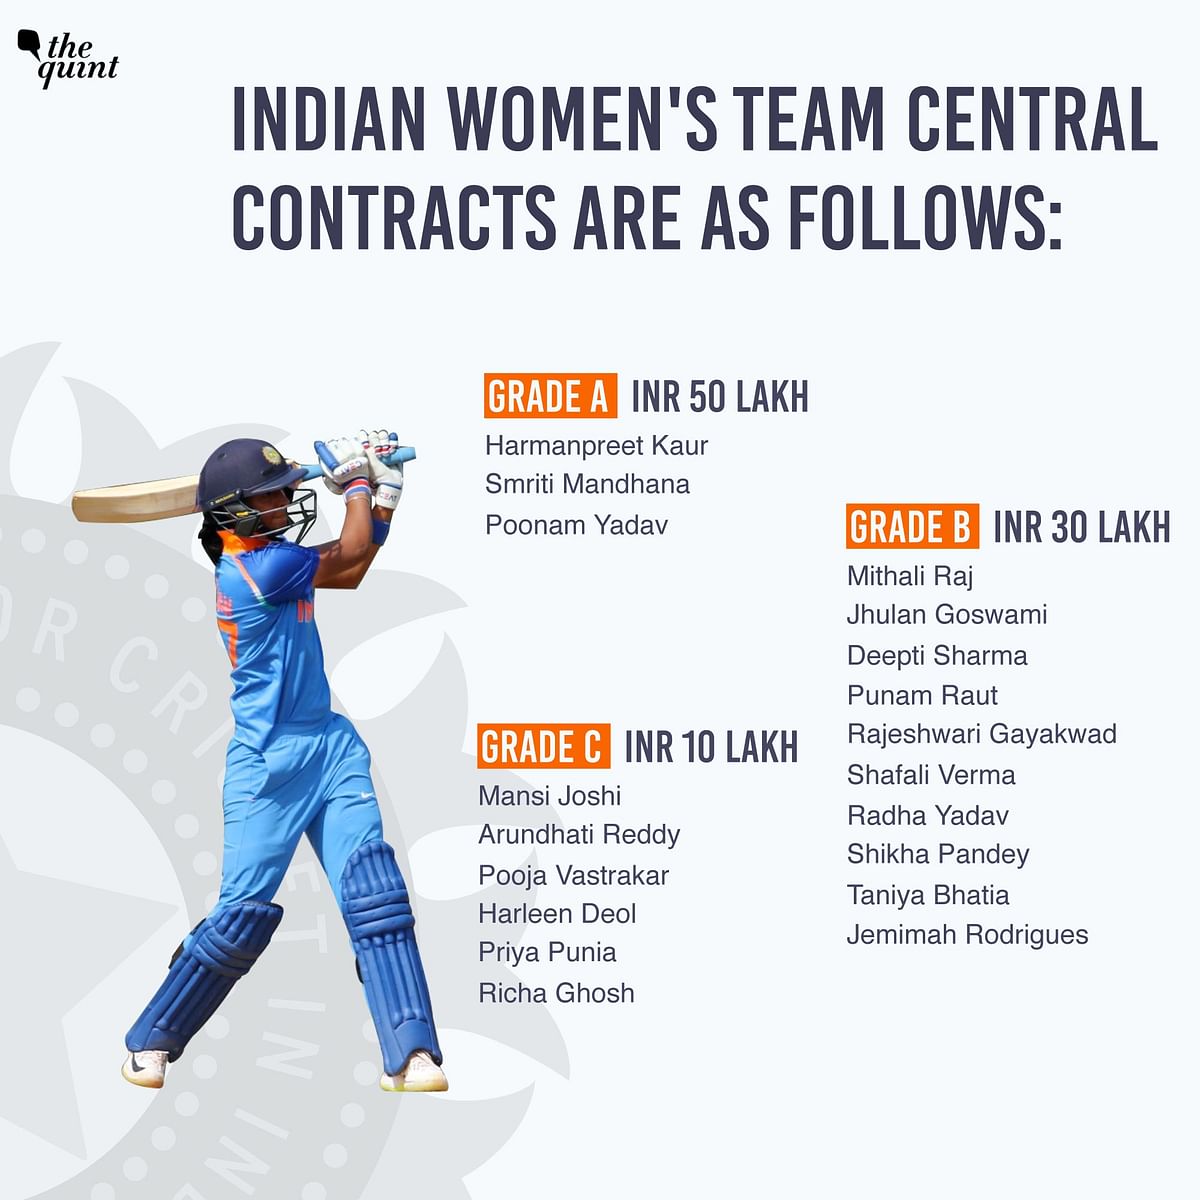 Shafali Verma moved up a notch while Ekta Bisht and Veda Krishnamurthy missed out on a national contract. 